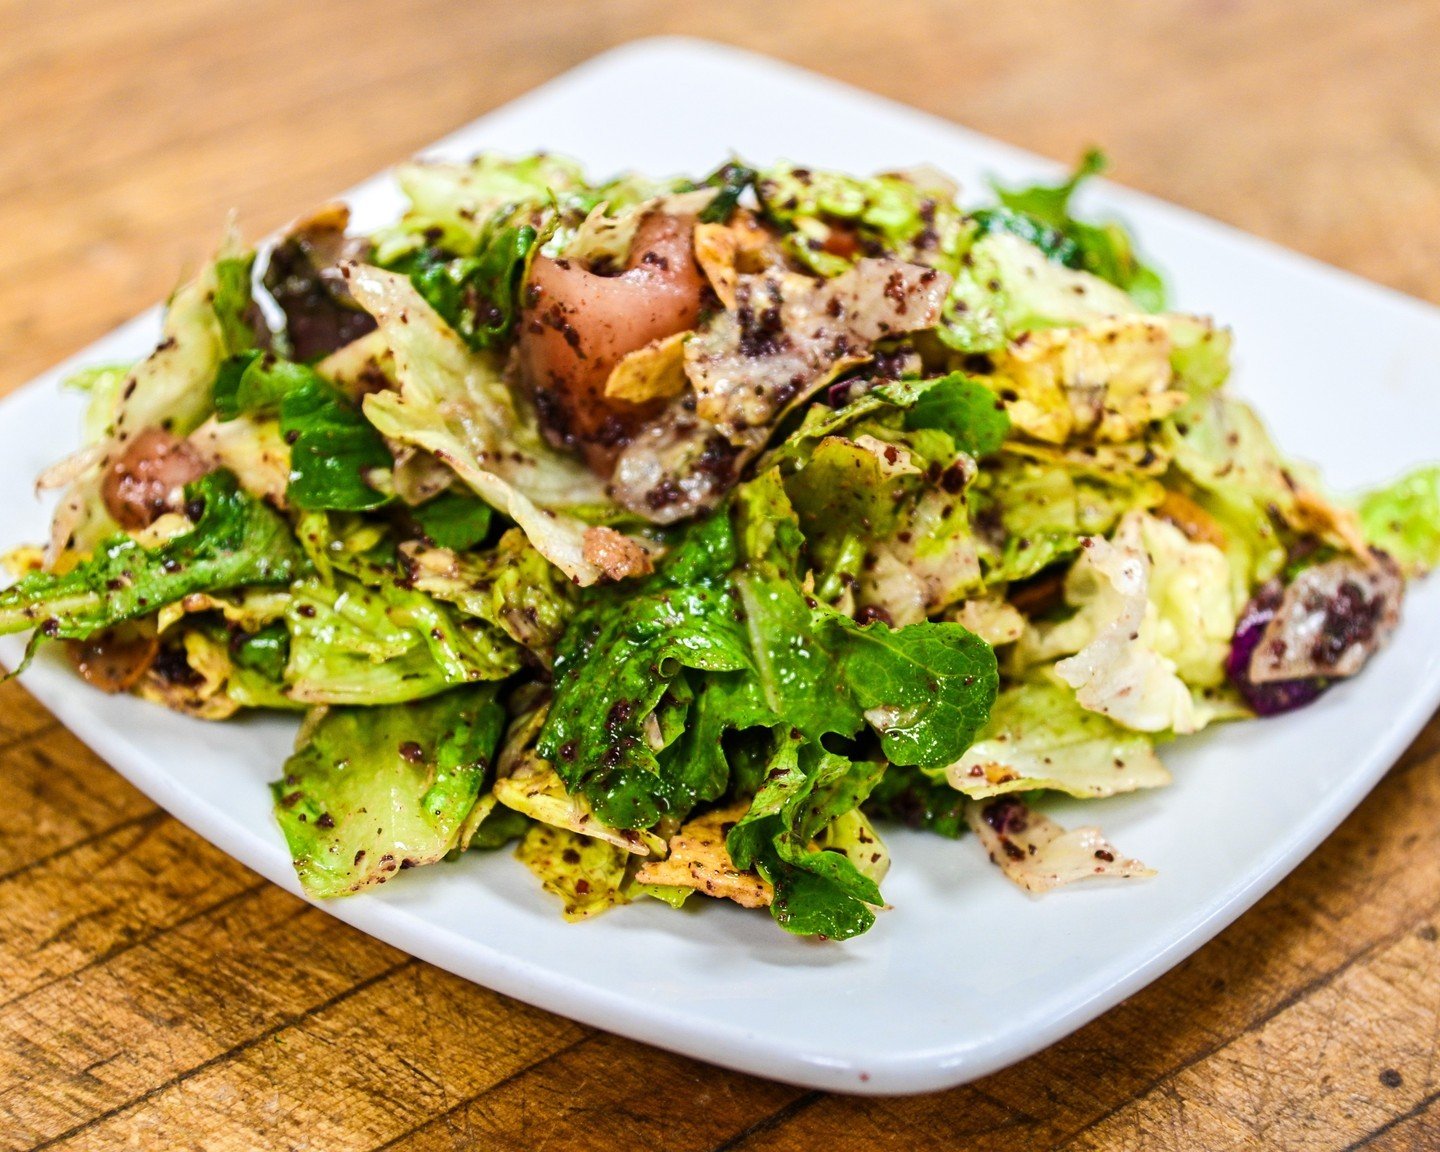 Fresh greens have never looked this good 🤩⠀
Stop on by and get a flavorful Fattoush Salad, available as a vegetarian option or add chicken🥗⠀
⠀
👉 We're Open 11am to 9pm.⠀⠀
👉 View Menu + Order Online: link in bio⠀⠀
⠀⠀
#IkesRestaurant #SterlingHeigh